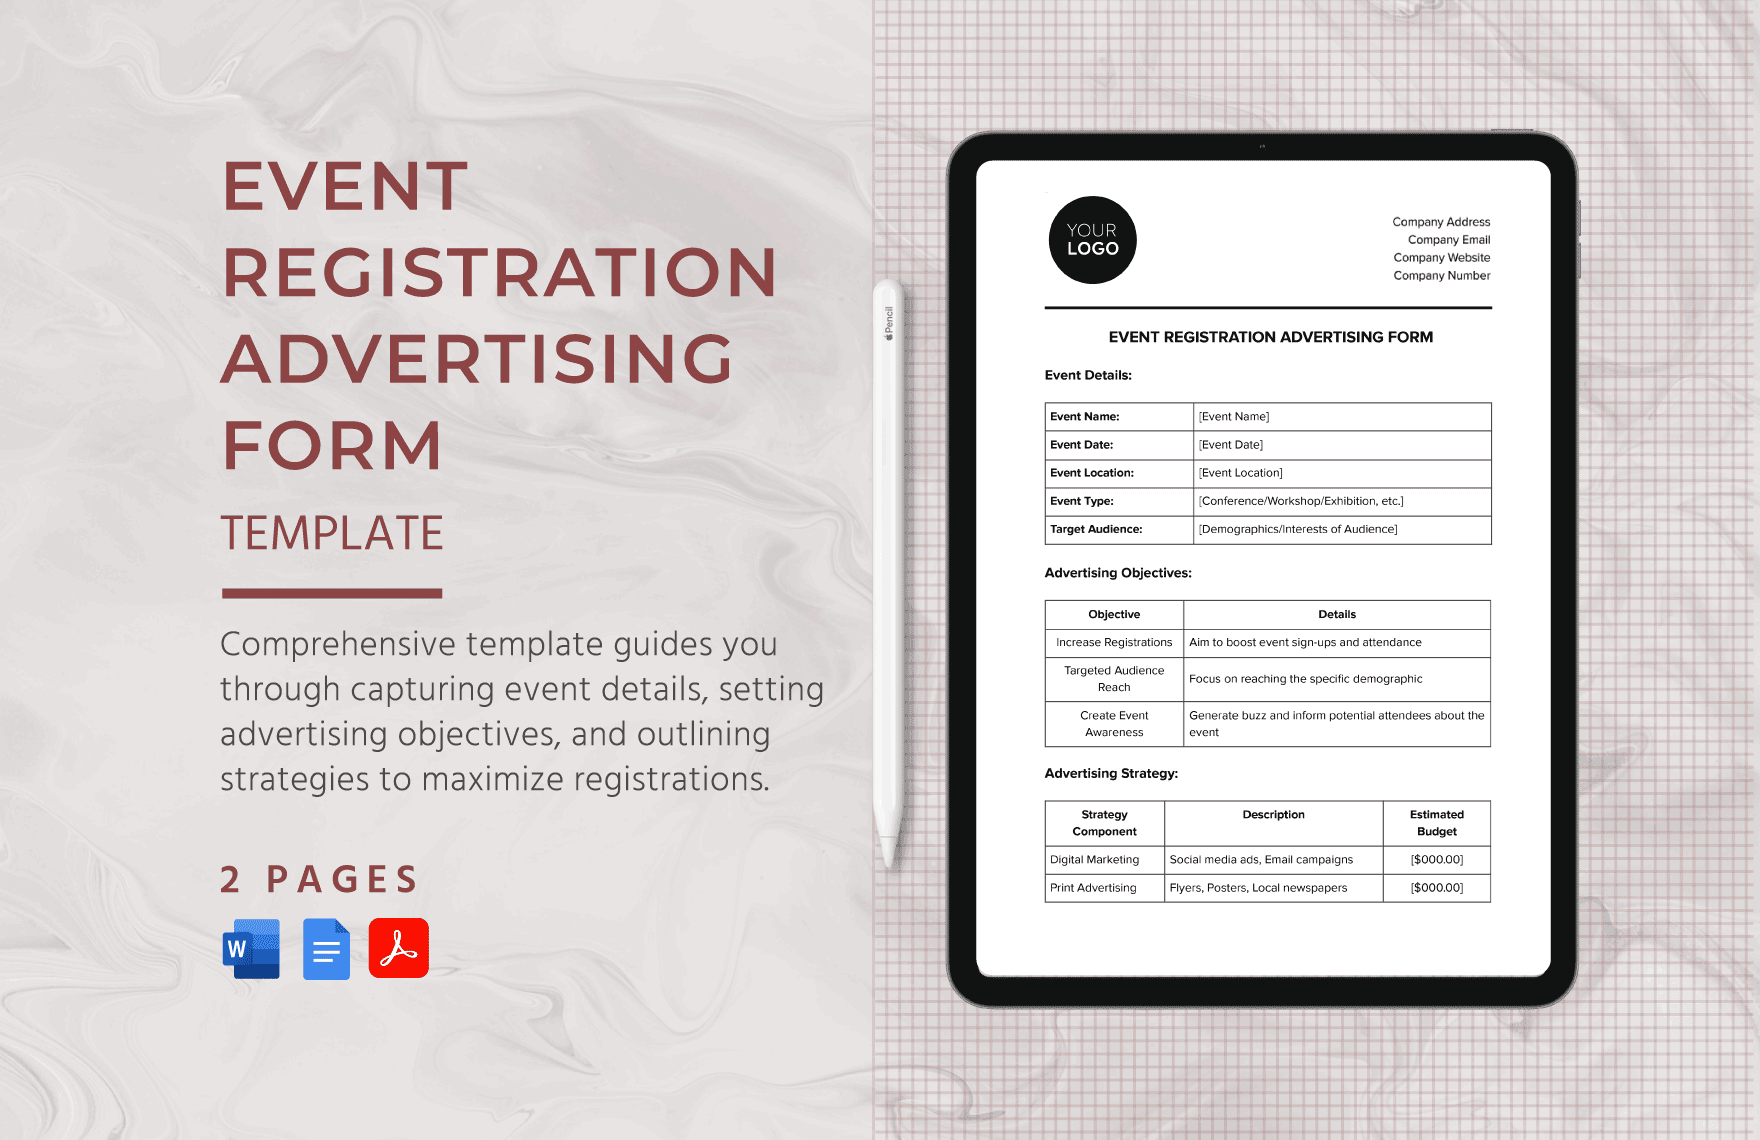 Event Registration Advertising Form Template in Word, Google Docs, PDF